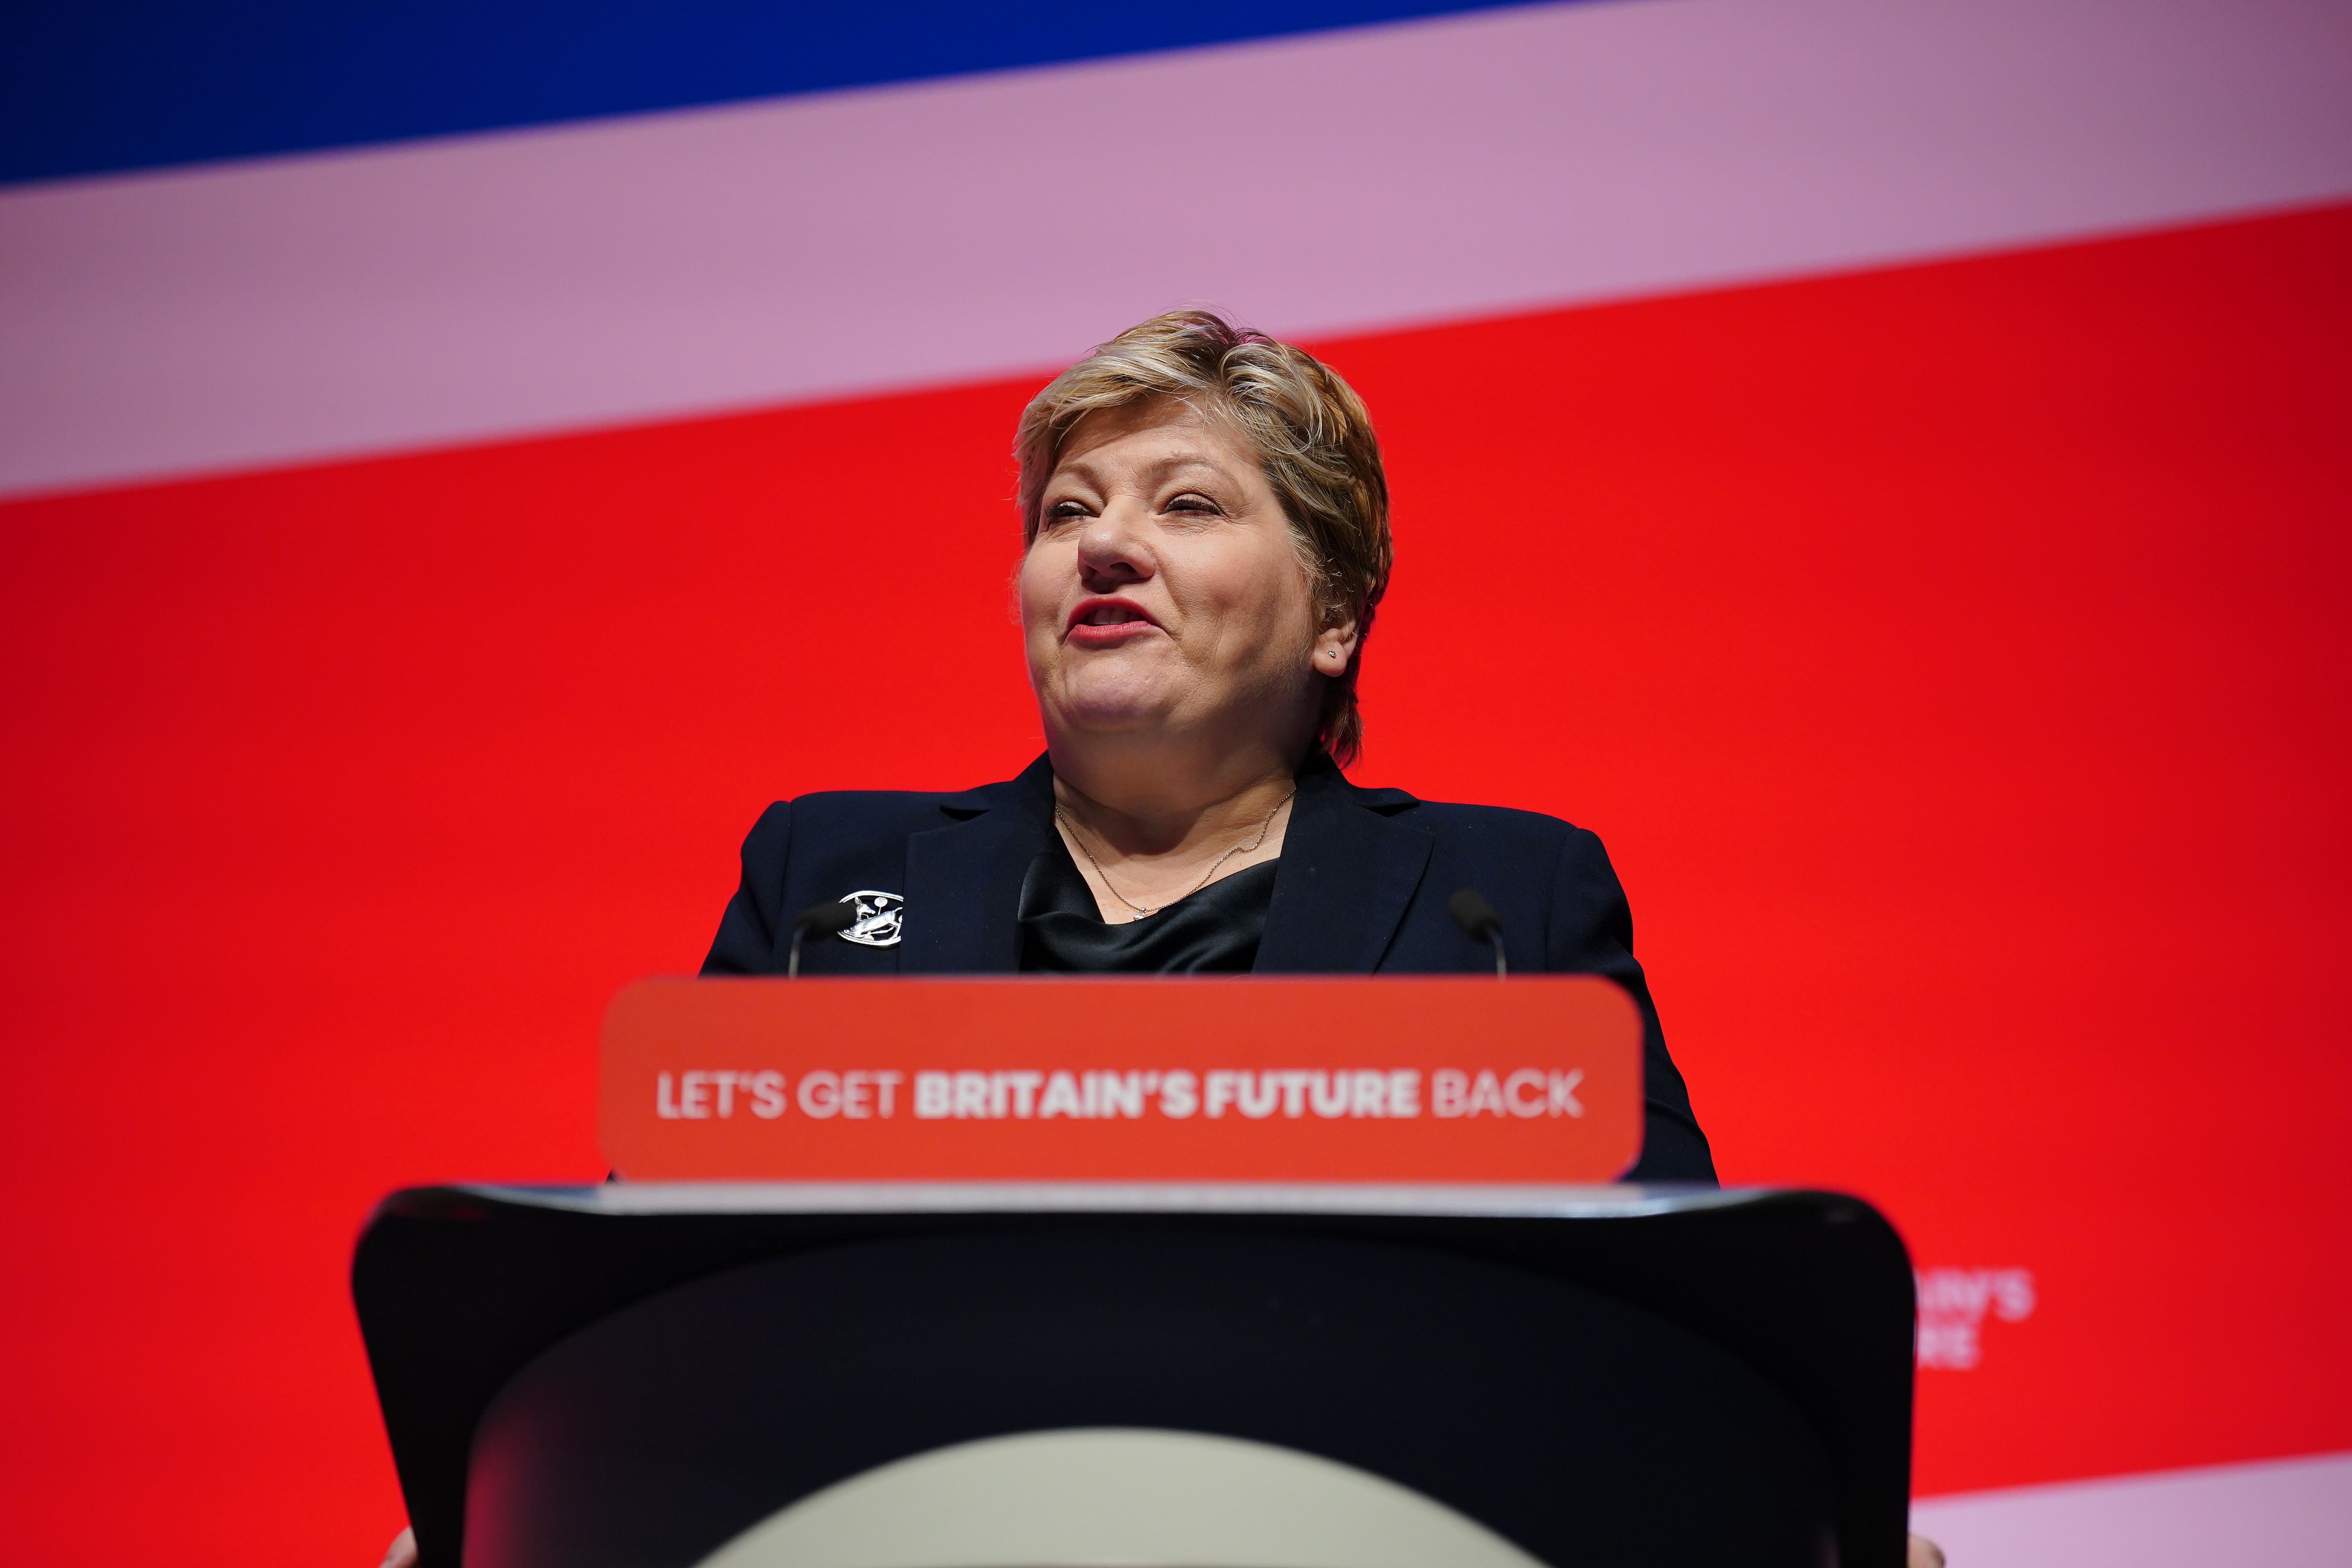 Emily Thornberry said she was ‘an idiot’ for being taken in but that many people had faced the same problem